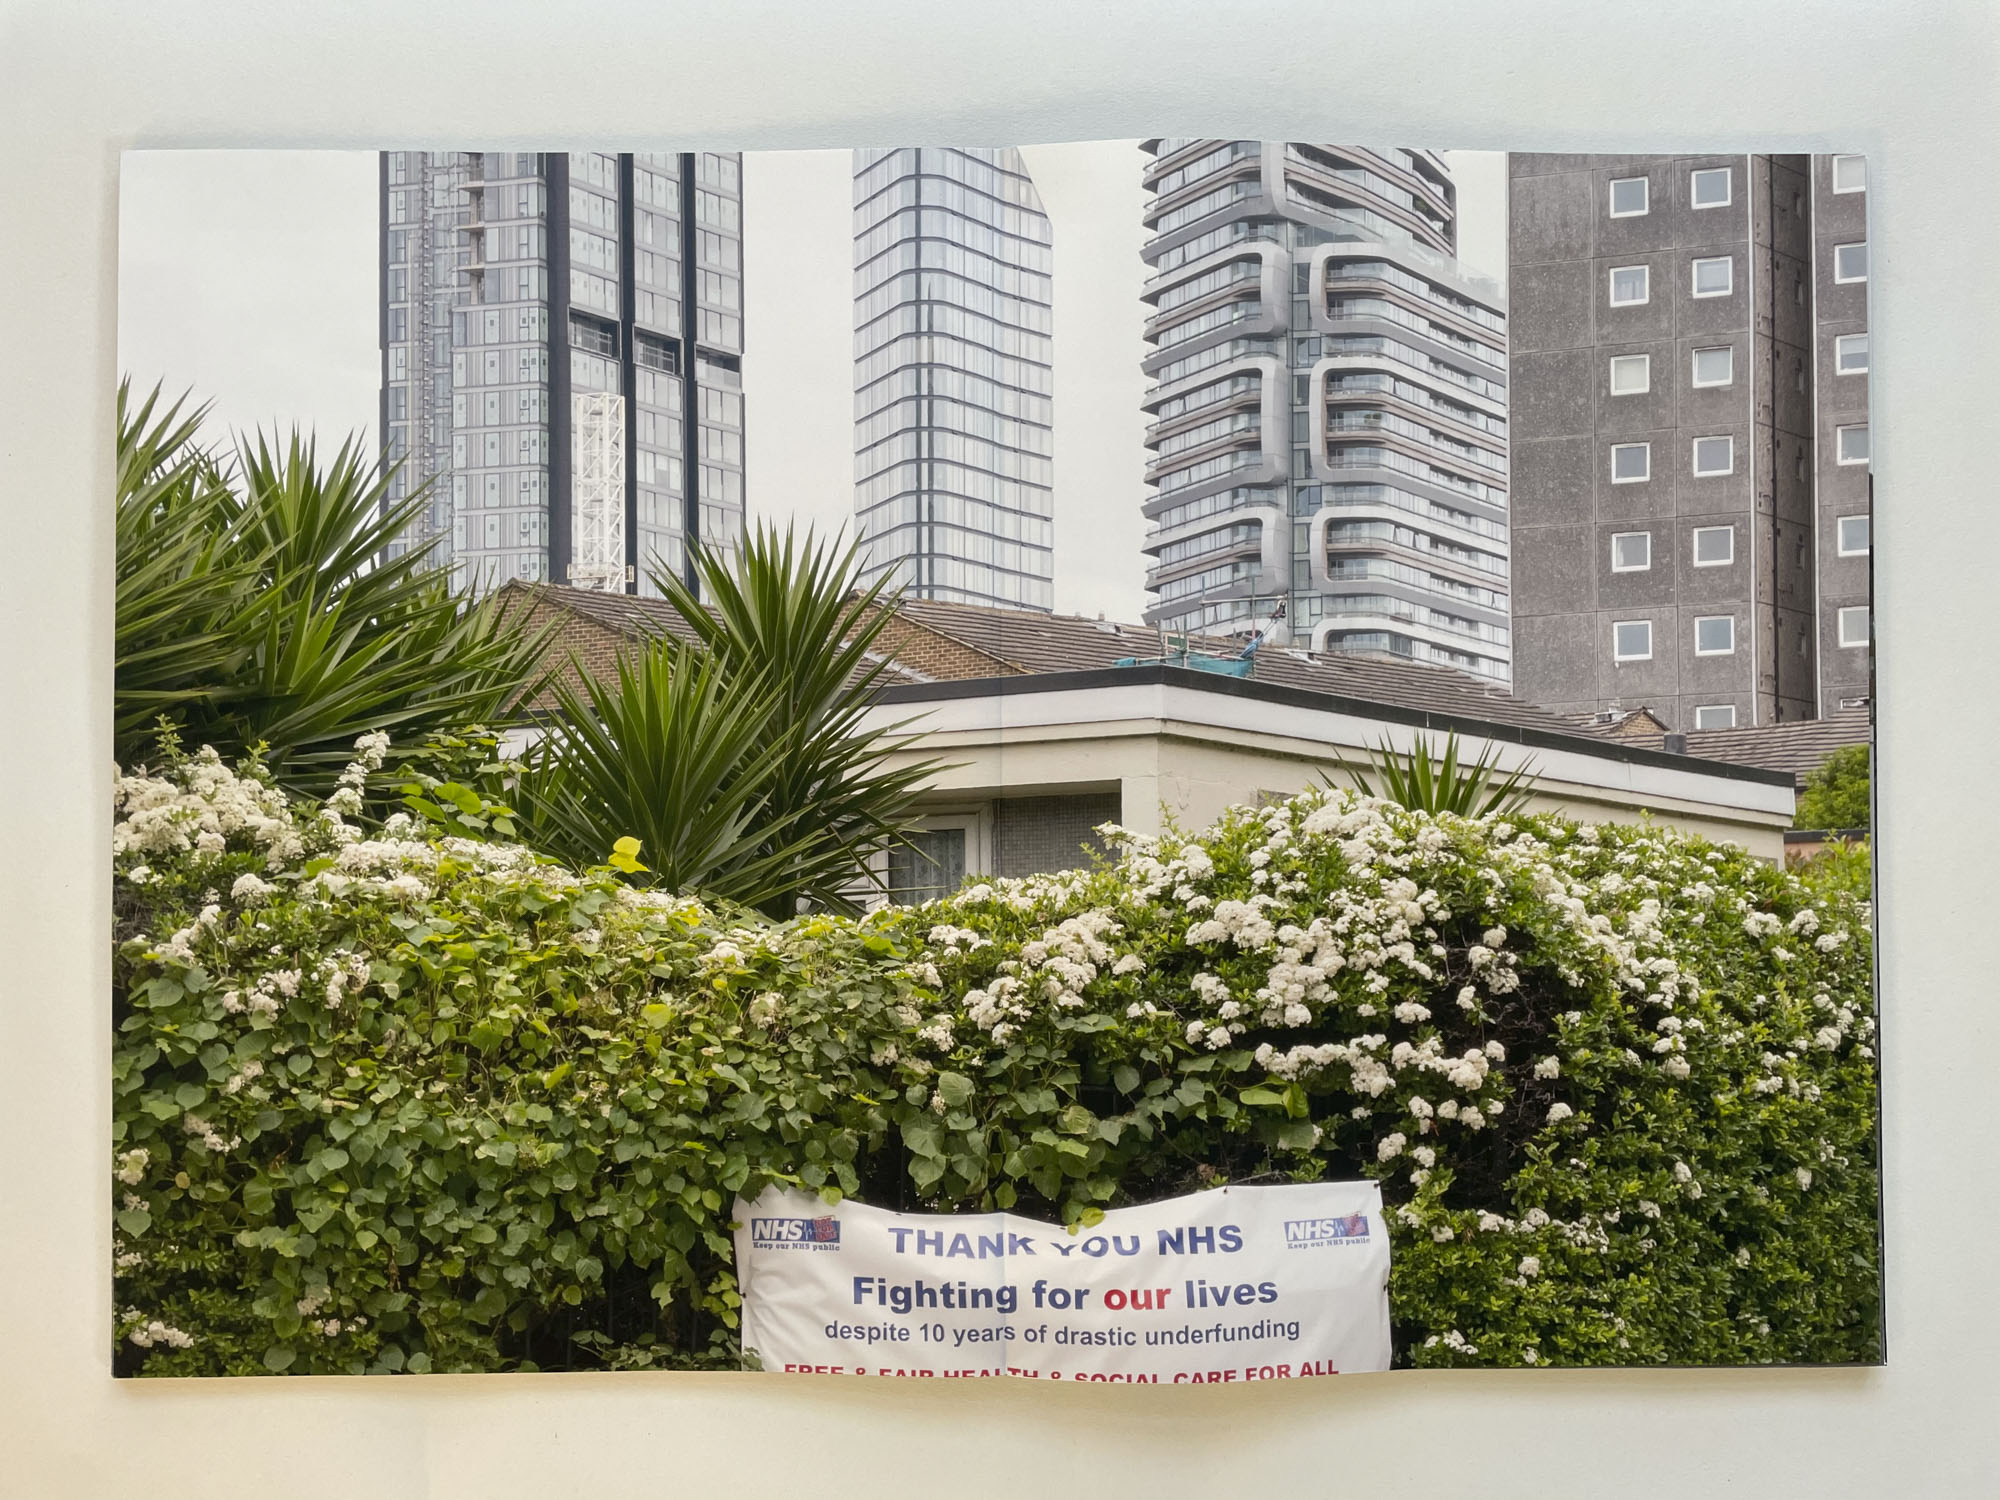 in the foreground against a flowering hedge is a banner with the words Thank you NHS. Fighting for our lives despite 10 years of drastic underfunding; behind rise three glass and steel luxury apartment buildings